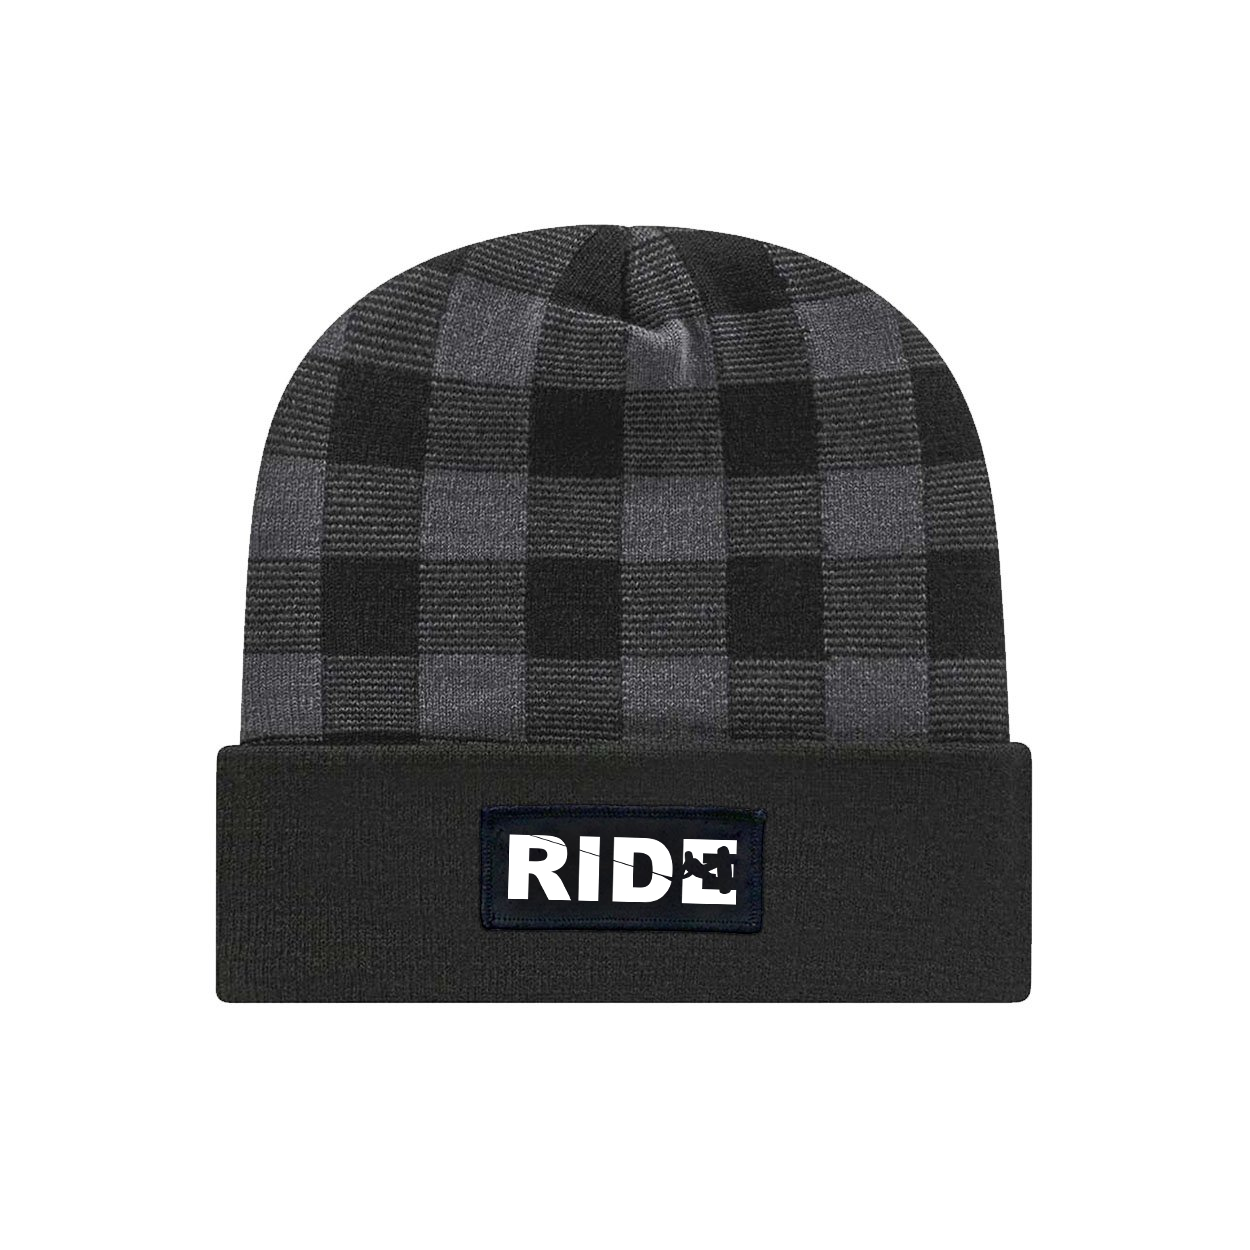 Ride Wakeboard Logo Night Out Woven Patch Roll Up Plaid Beanie Black/Heather Gray (White Logo)